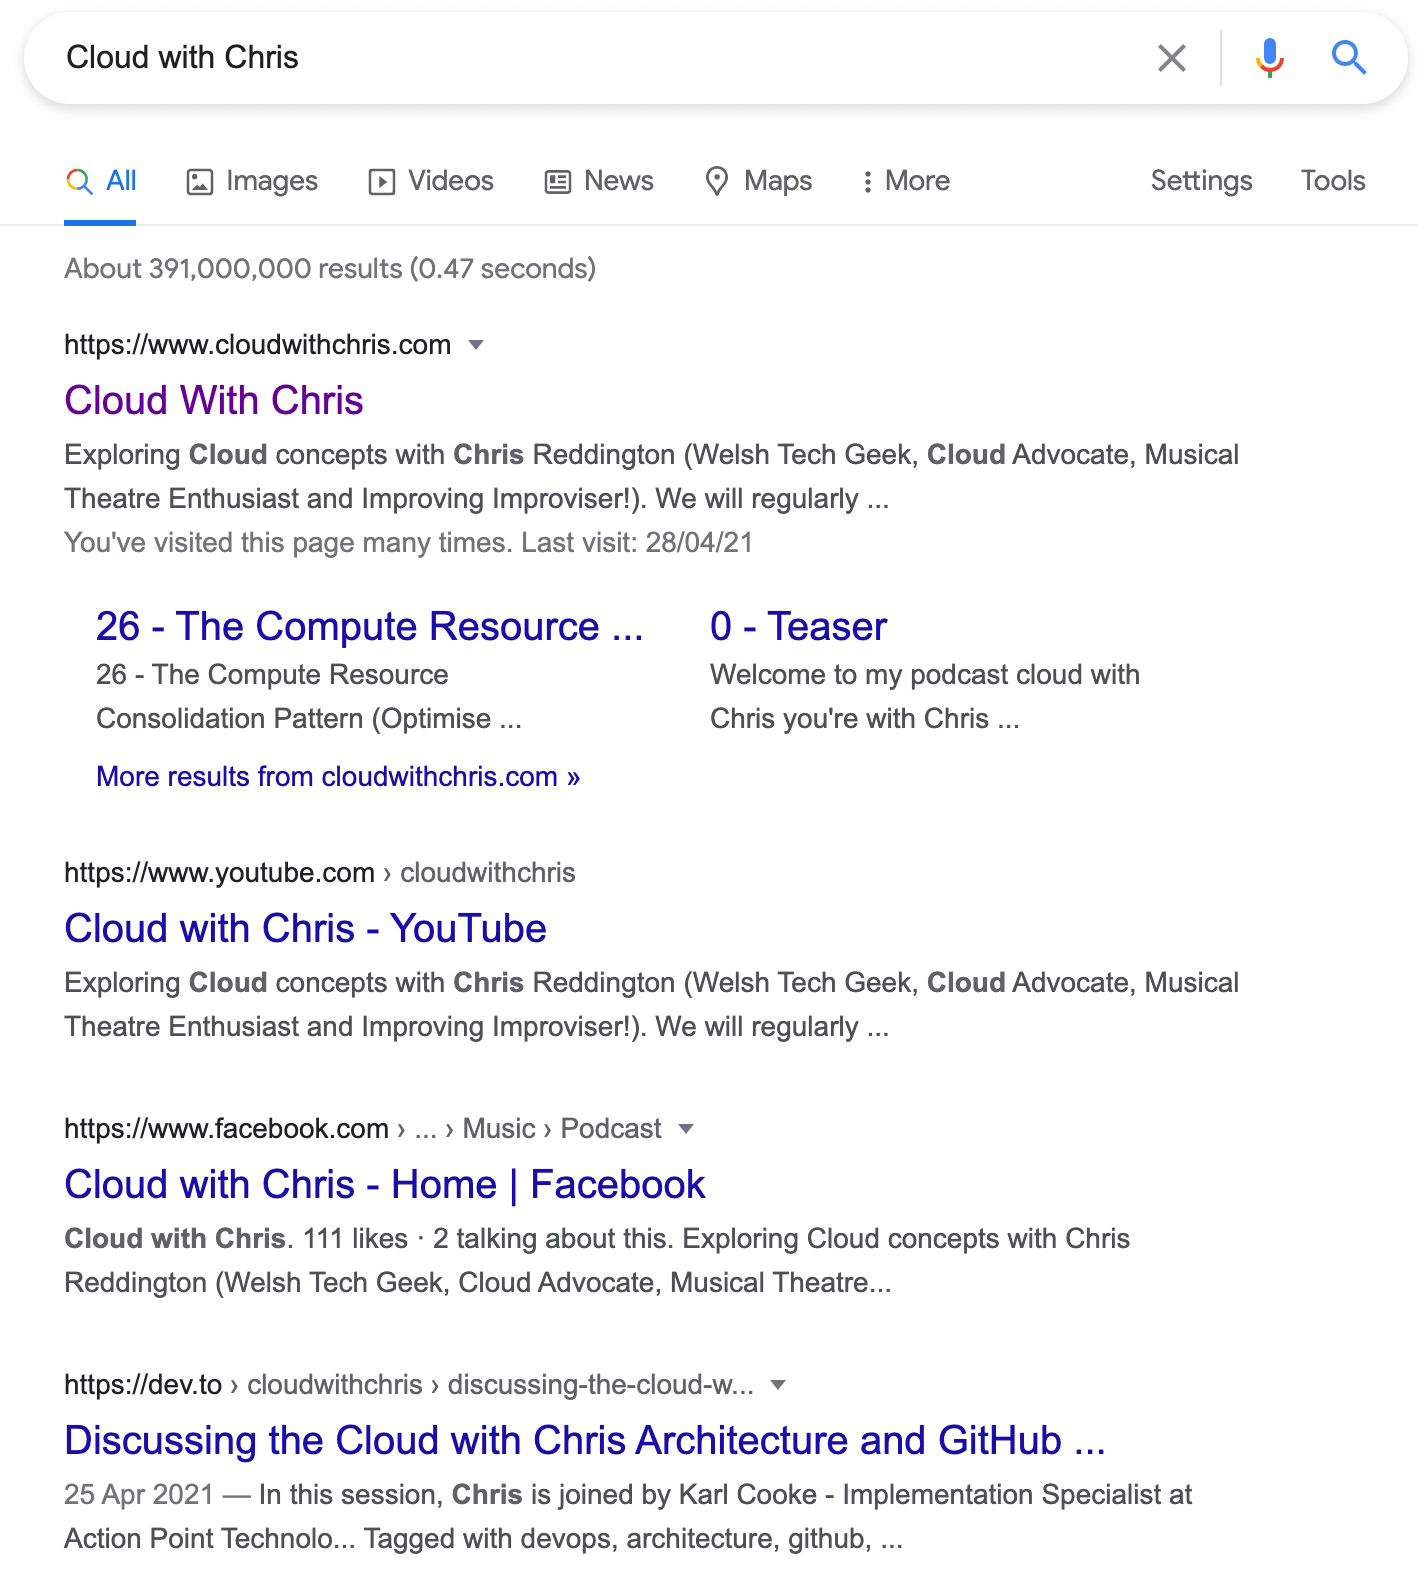 Search results for Cloud with Chris in Google